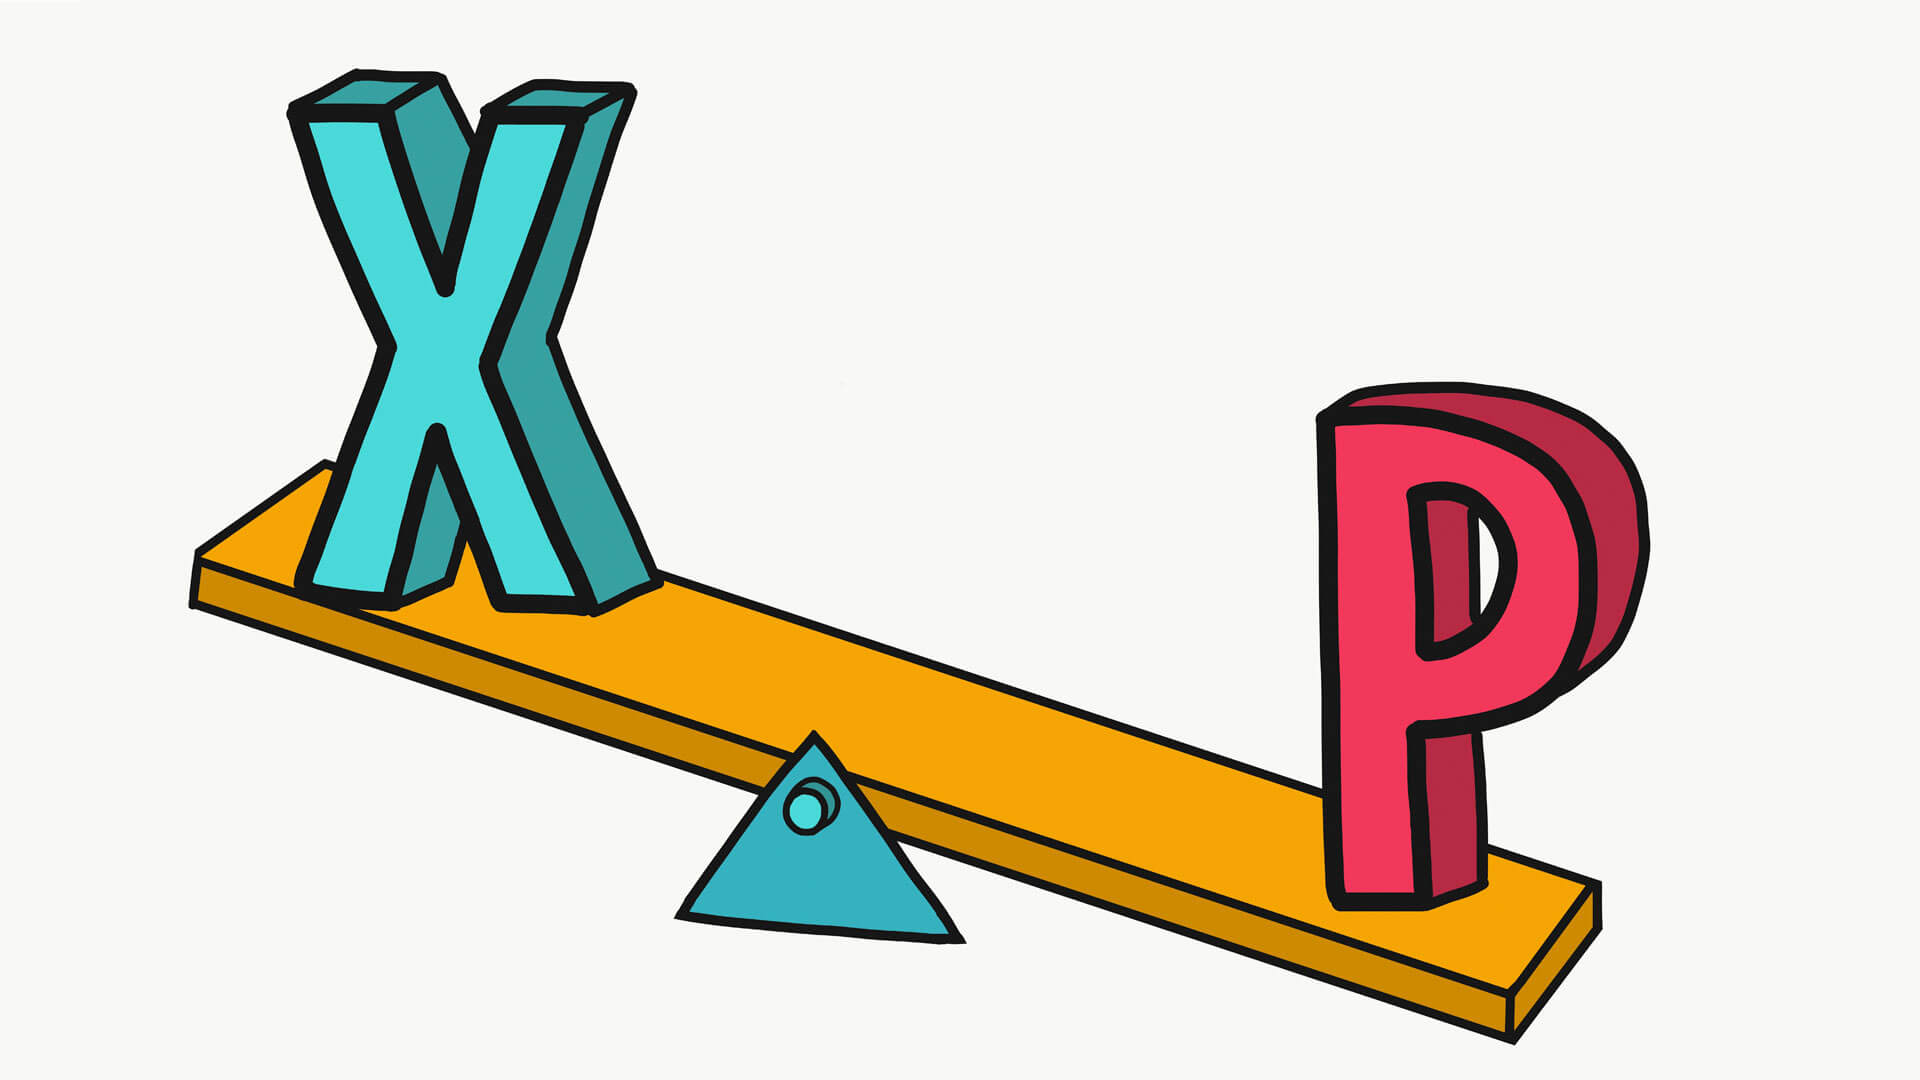 Illustration of X and P on a seesaw